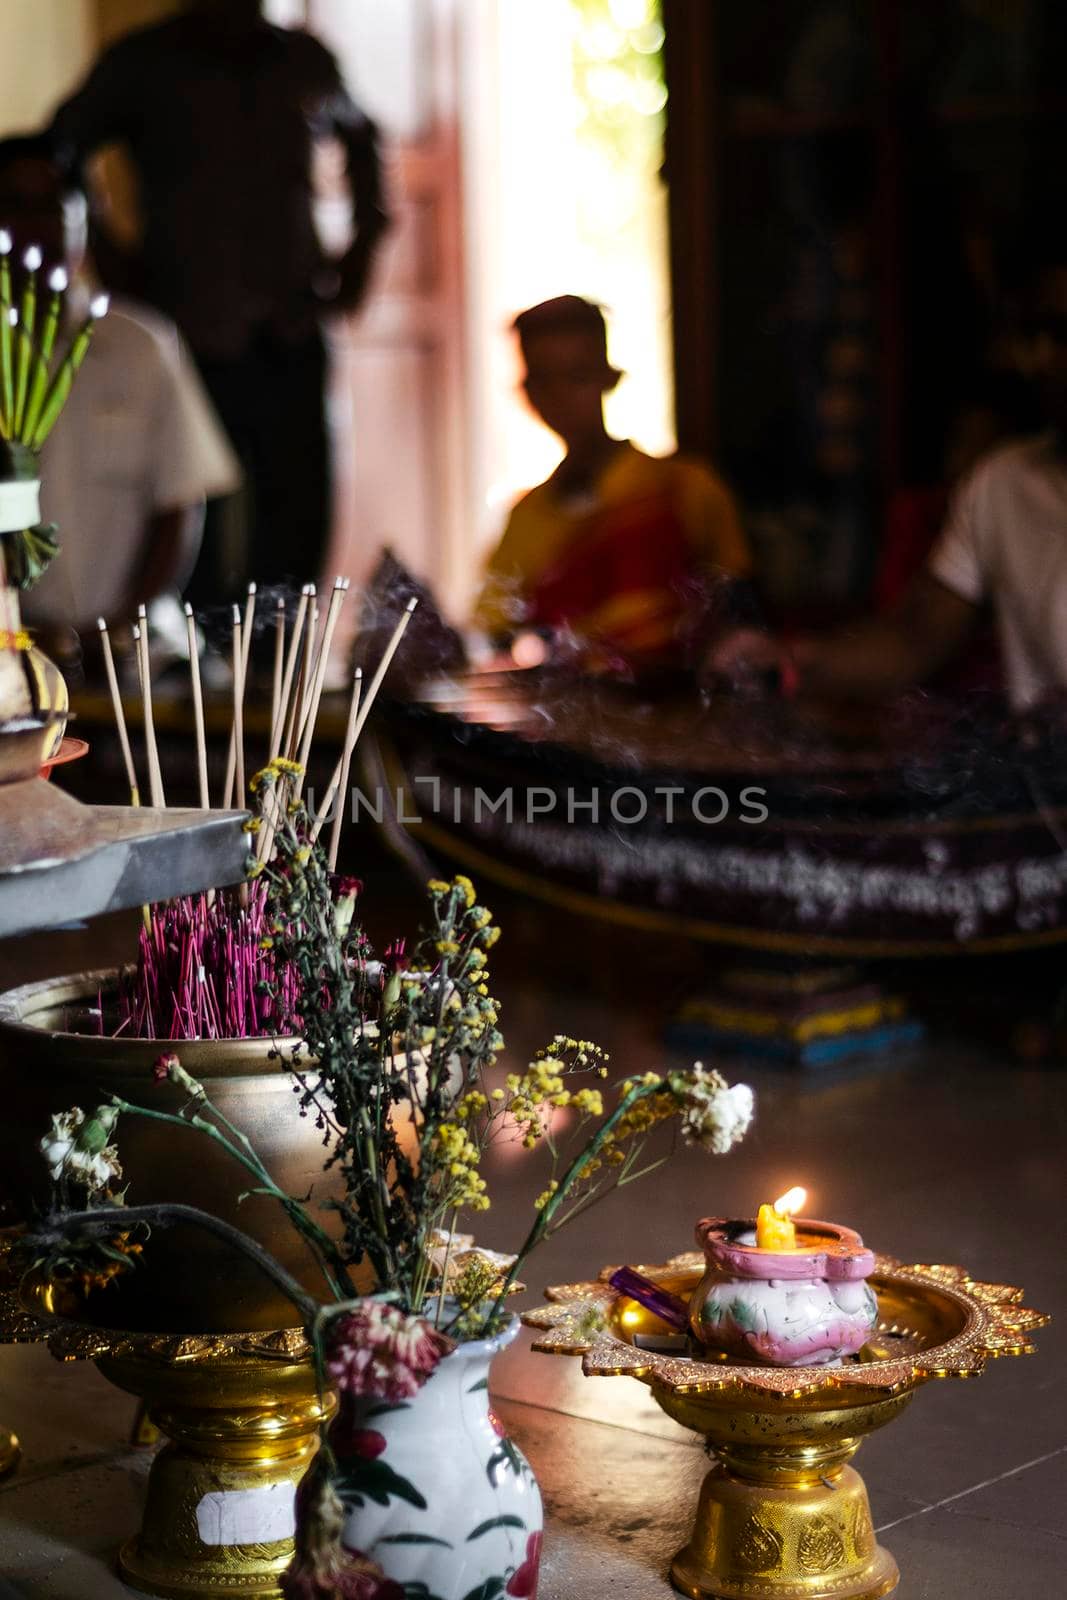 interior shrine detail at buddhist religious ceremony in UNESCO heritage Lakhon Khol site Wat Svay Andet temple in Kandal Province Cambodia